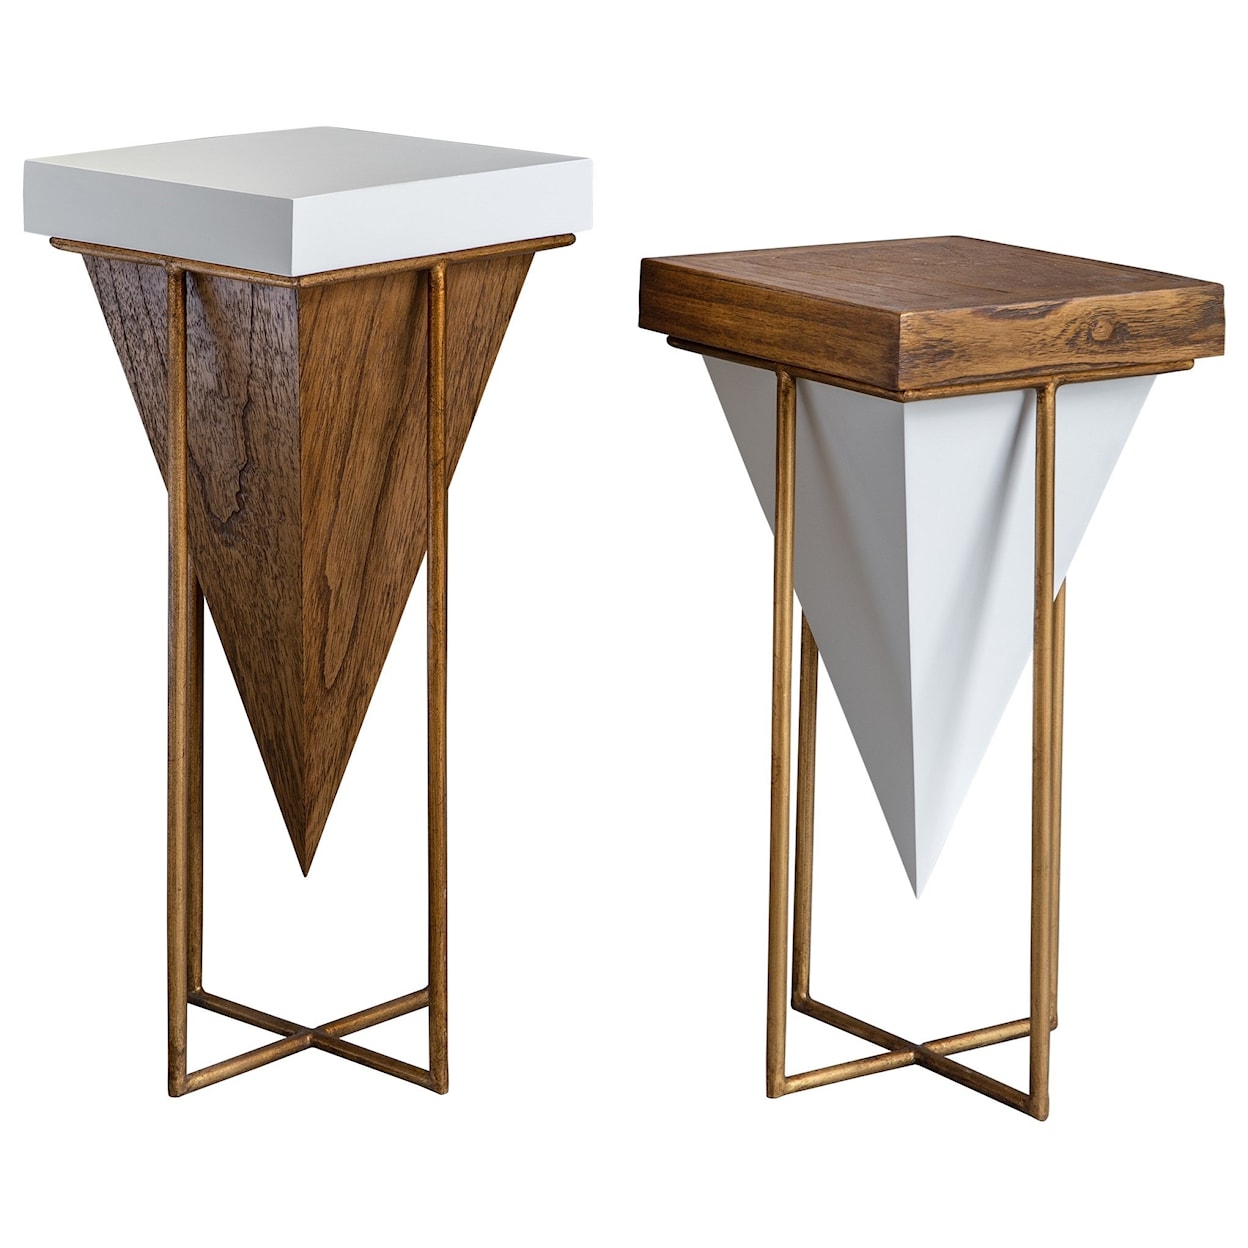 Uttermost Accent Furniture - Occasional Tables Kanos Accent Tables S/2